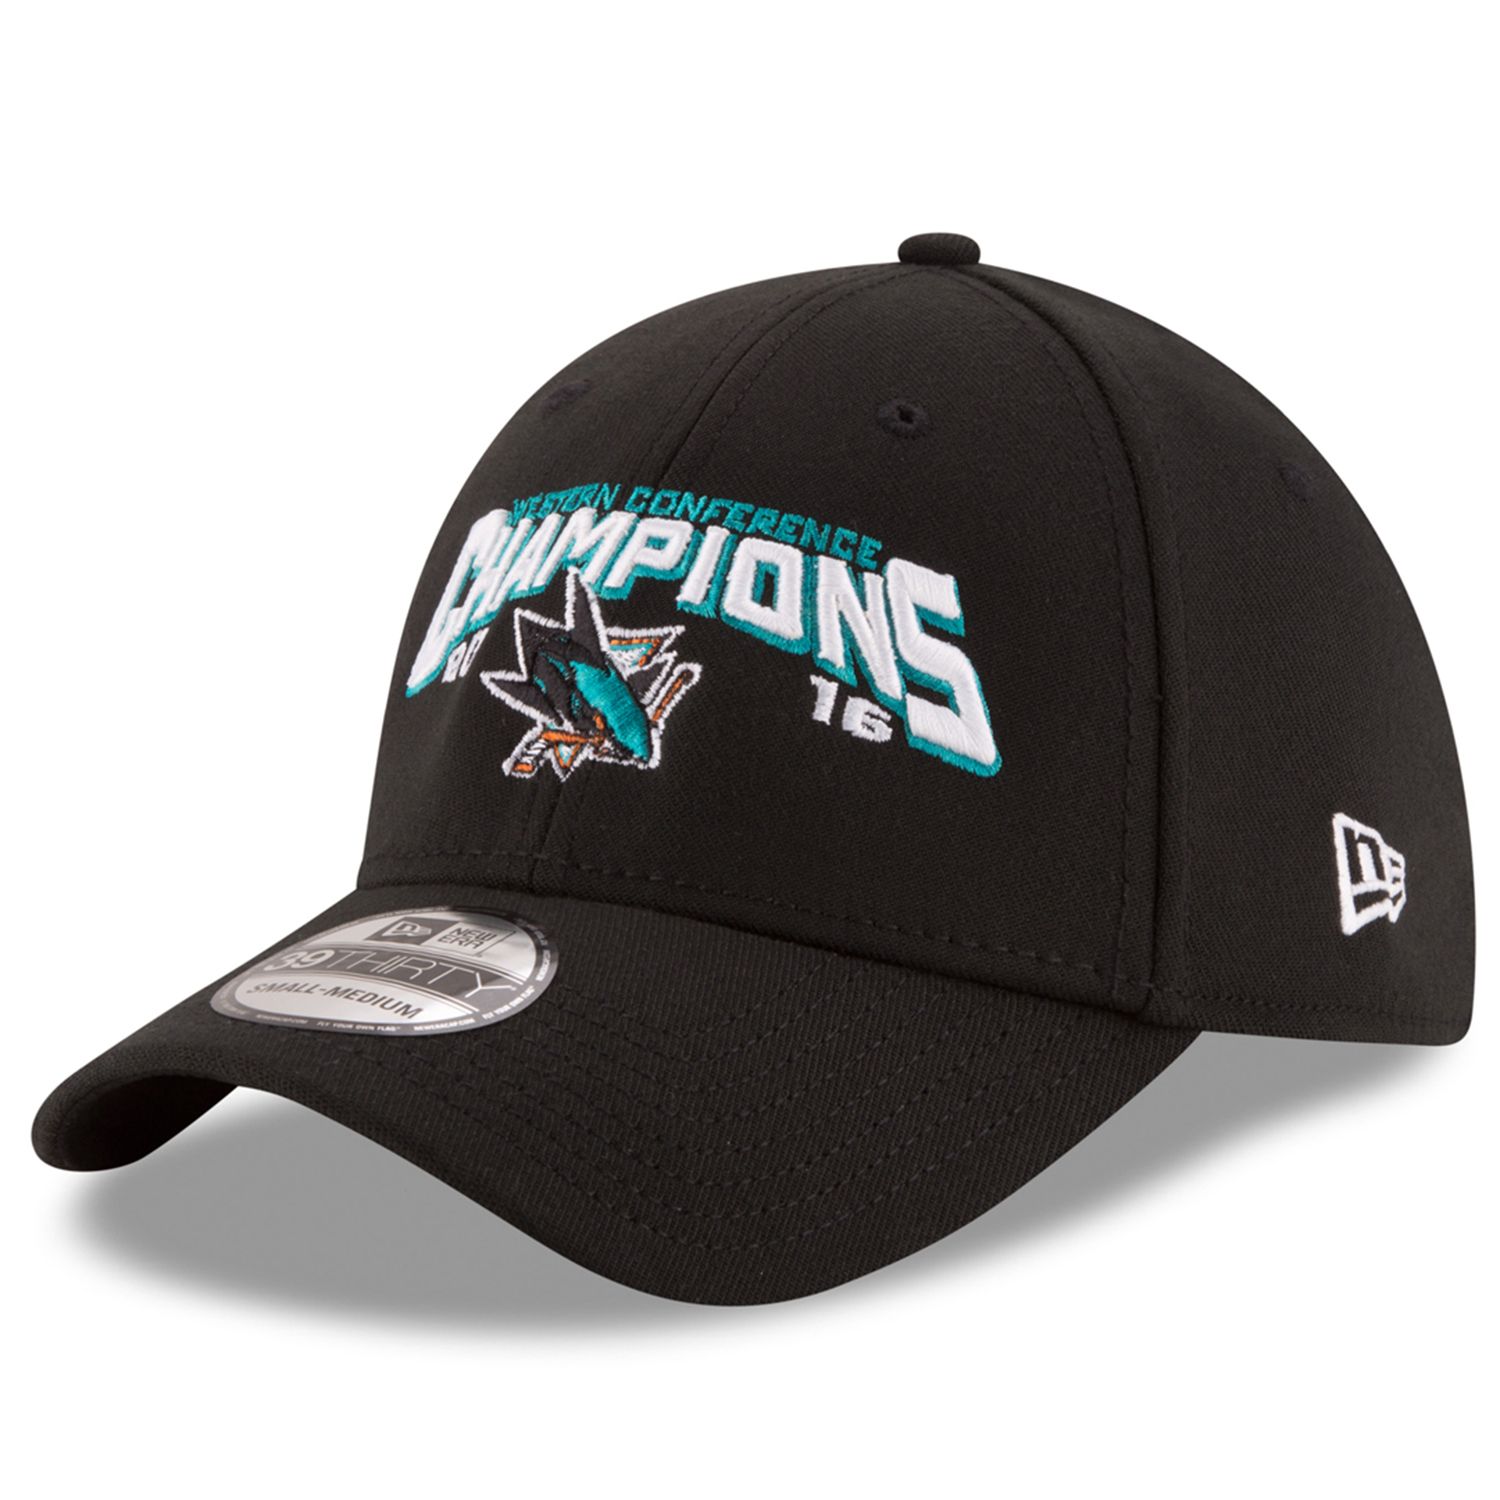 2016 NHL Western Conference Champs Cap